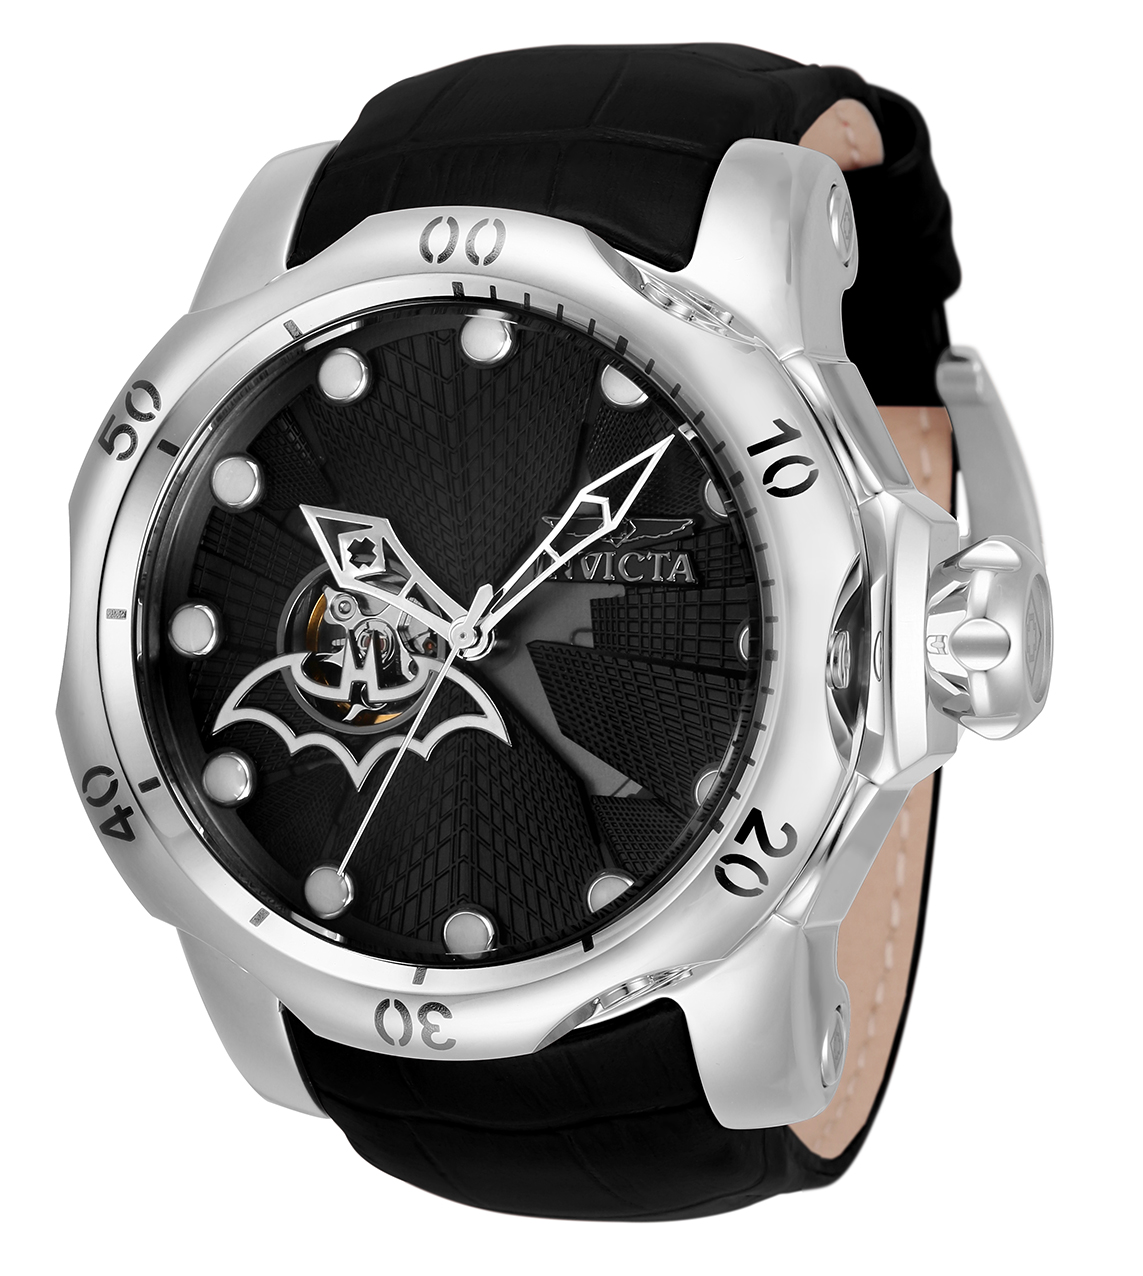 Invicta DC Comics Batman Automatic Mens Watch - 53.7mm Stainless Steel Case, Leather Band, Black (33816)